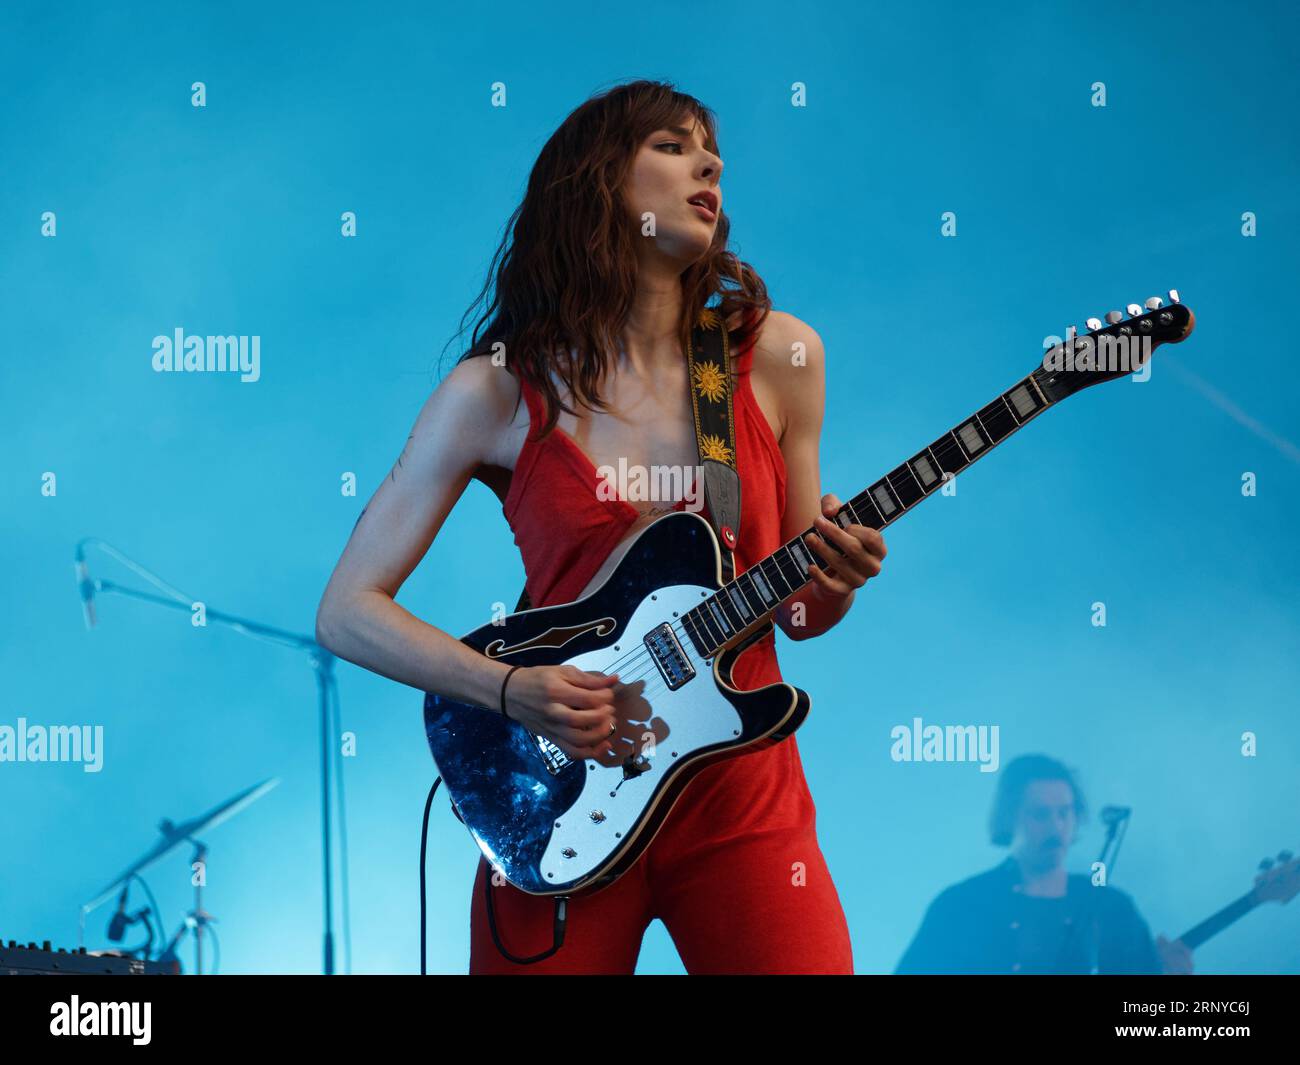 Canadian pop singer, Ariane Ray performs on stage at the Francos music festival  in Montreal. Quebec, Canada Stock Photo